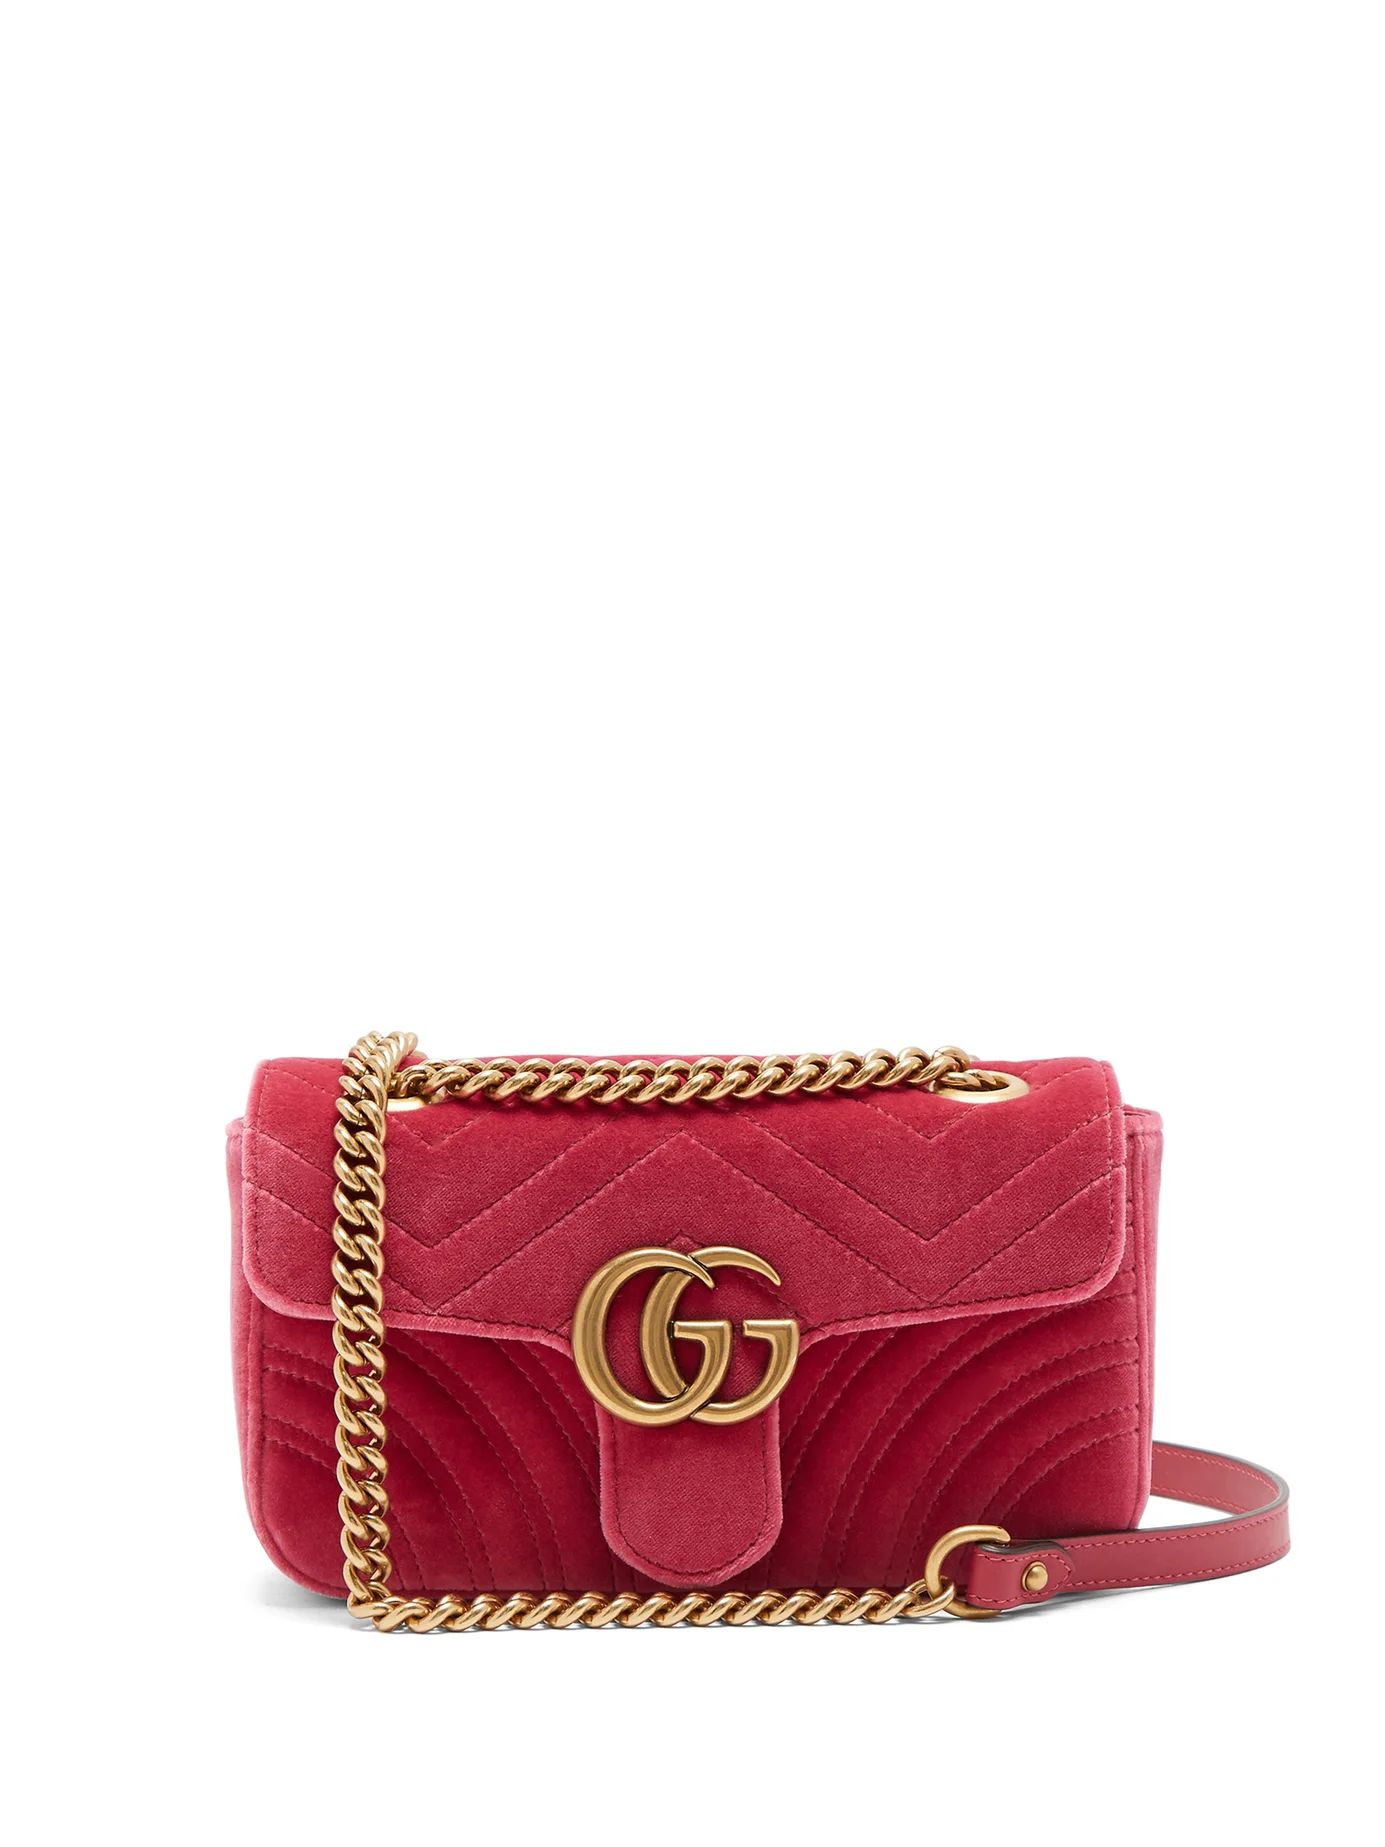 GG Marmont mini quilted-velvet cross-body bag | Matches (US)